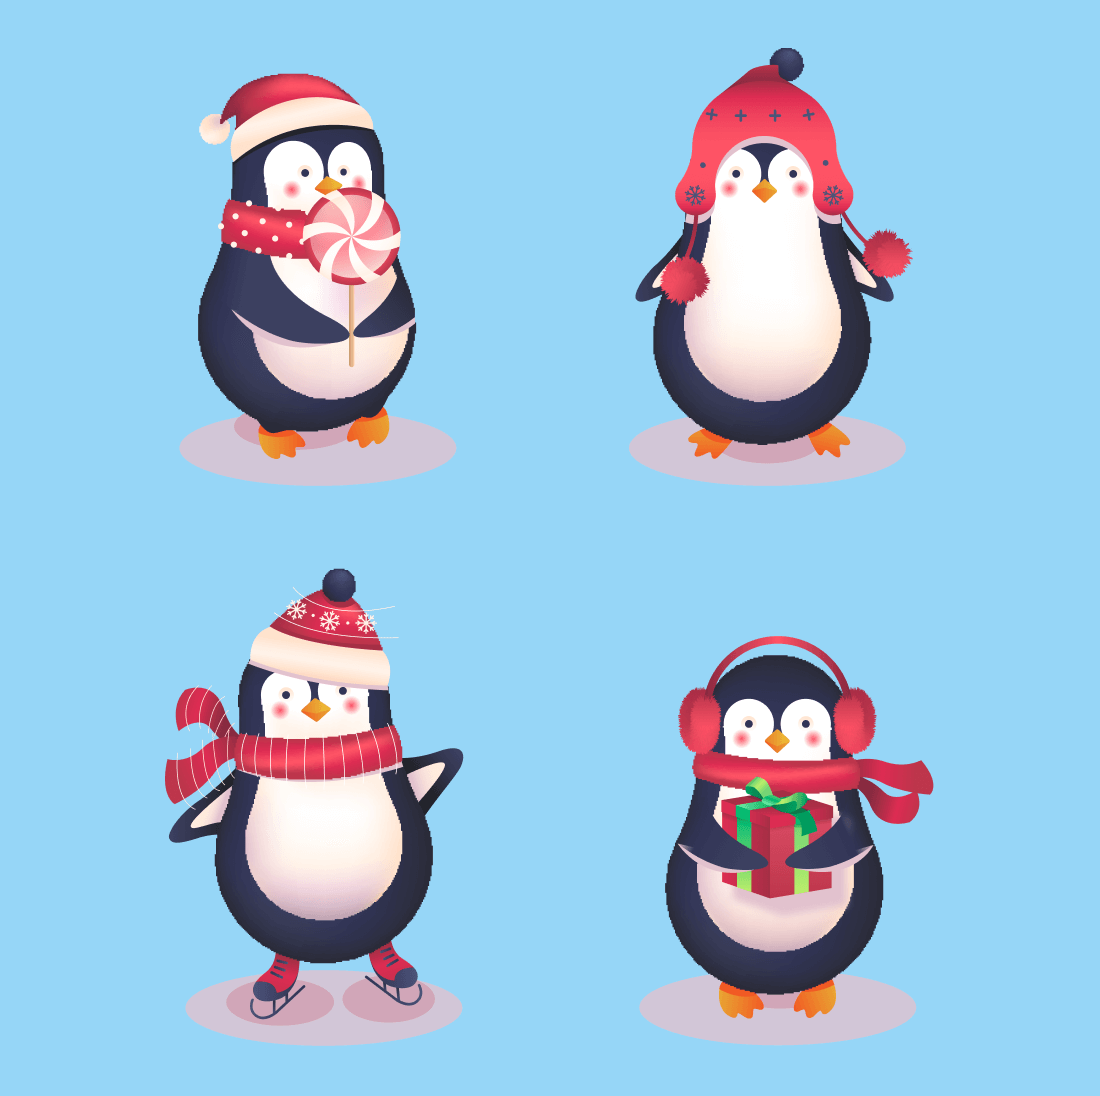 Group of penguins with hats and scarfs.